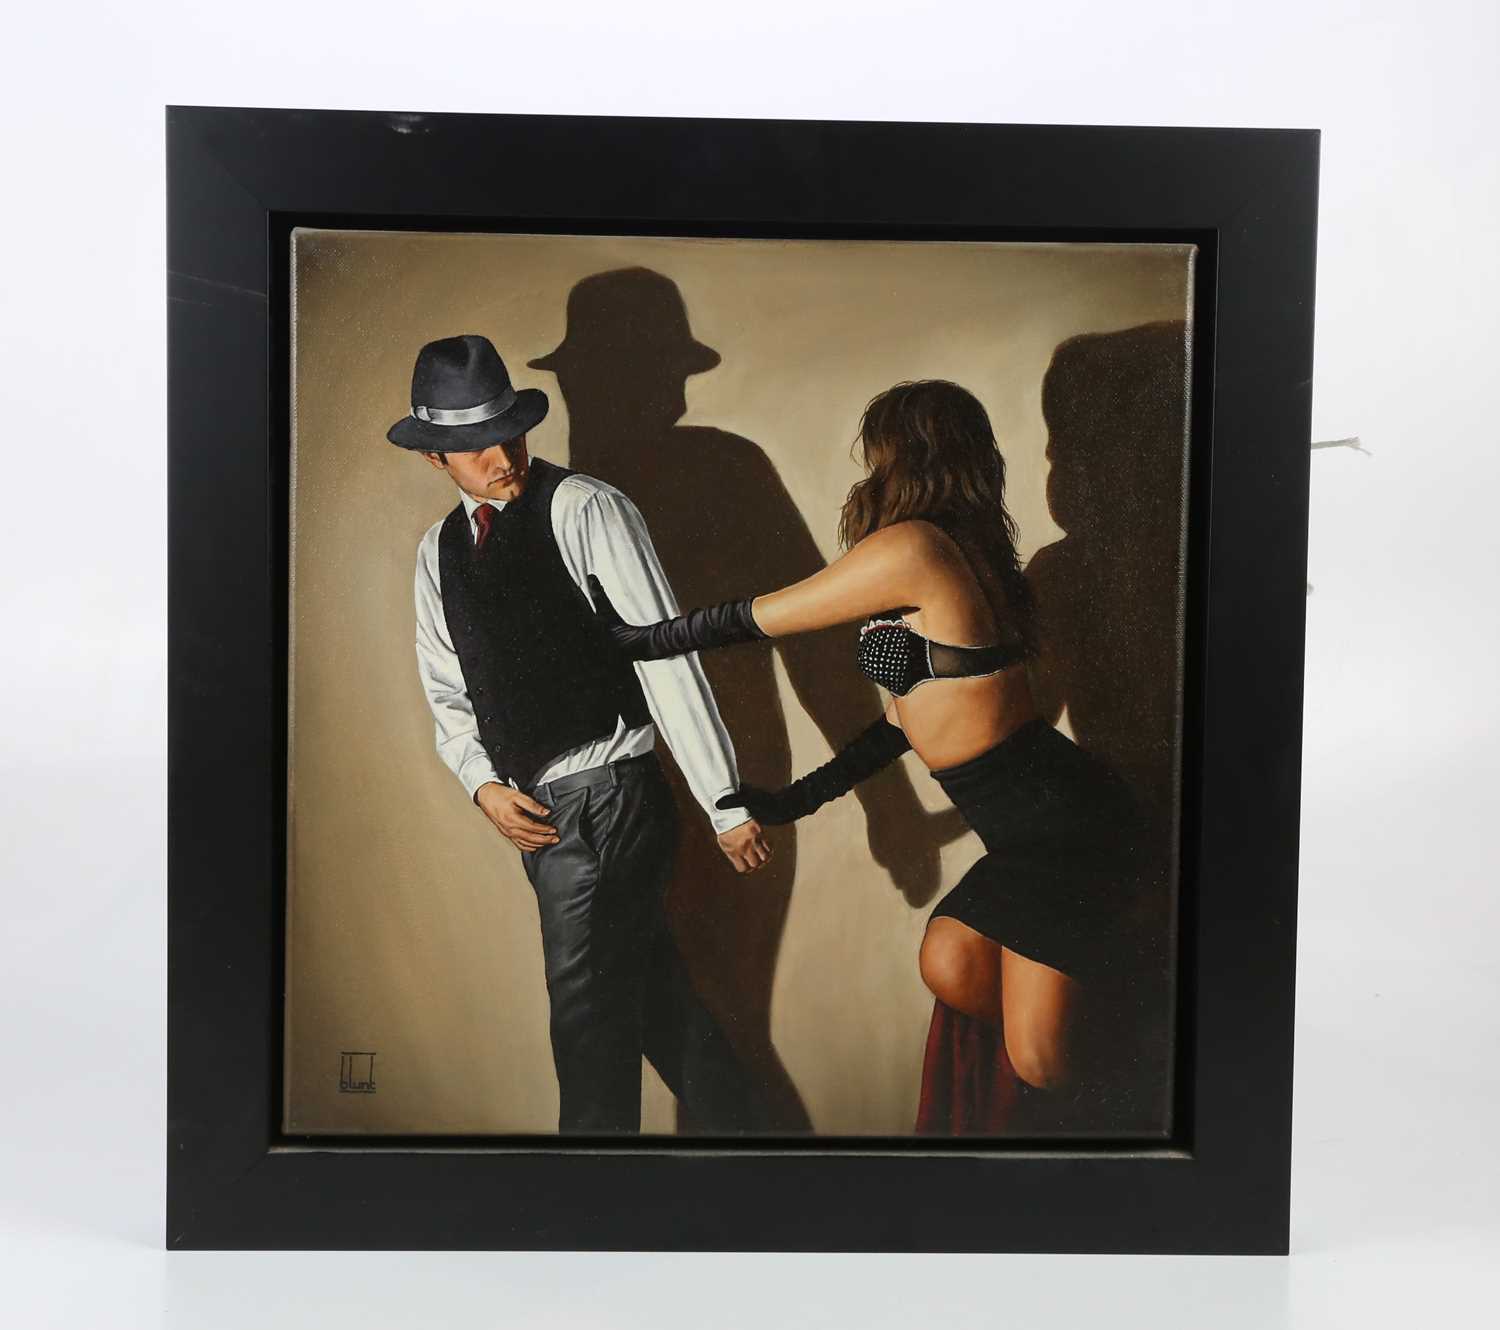 † RICHARD BLUNT; oil on canvas, 'Don't Leave Me This Way', signed lower left, 40 x 40cm, framed.